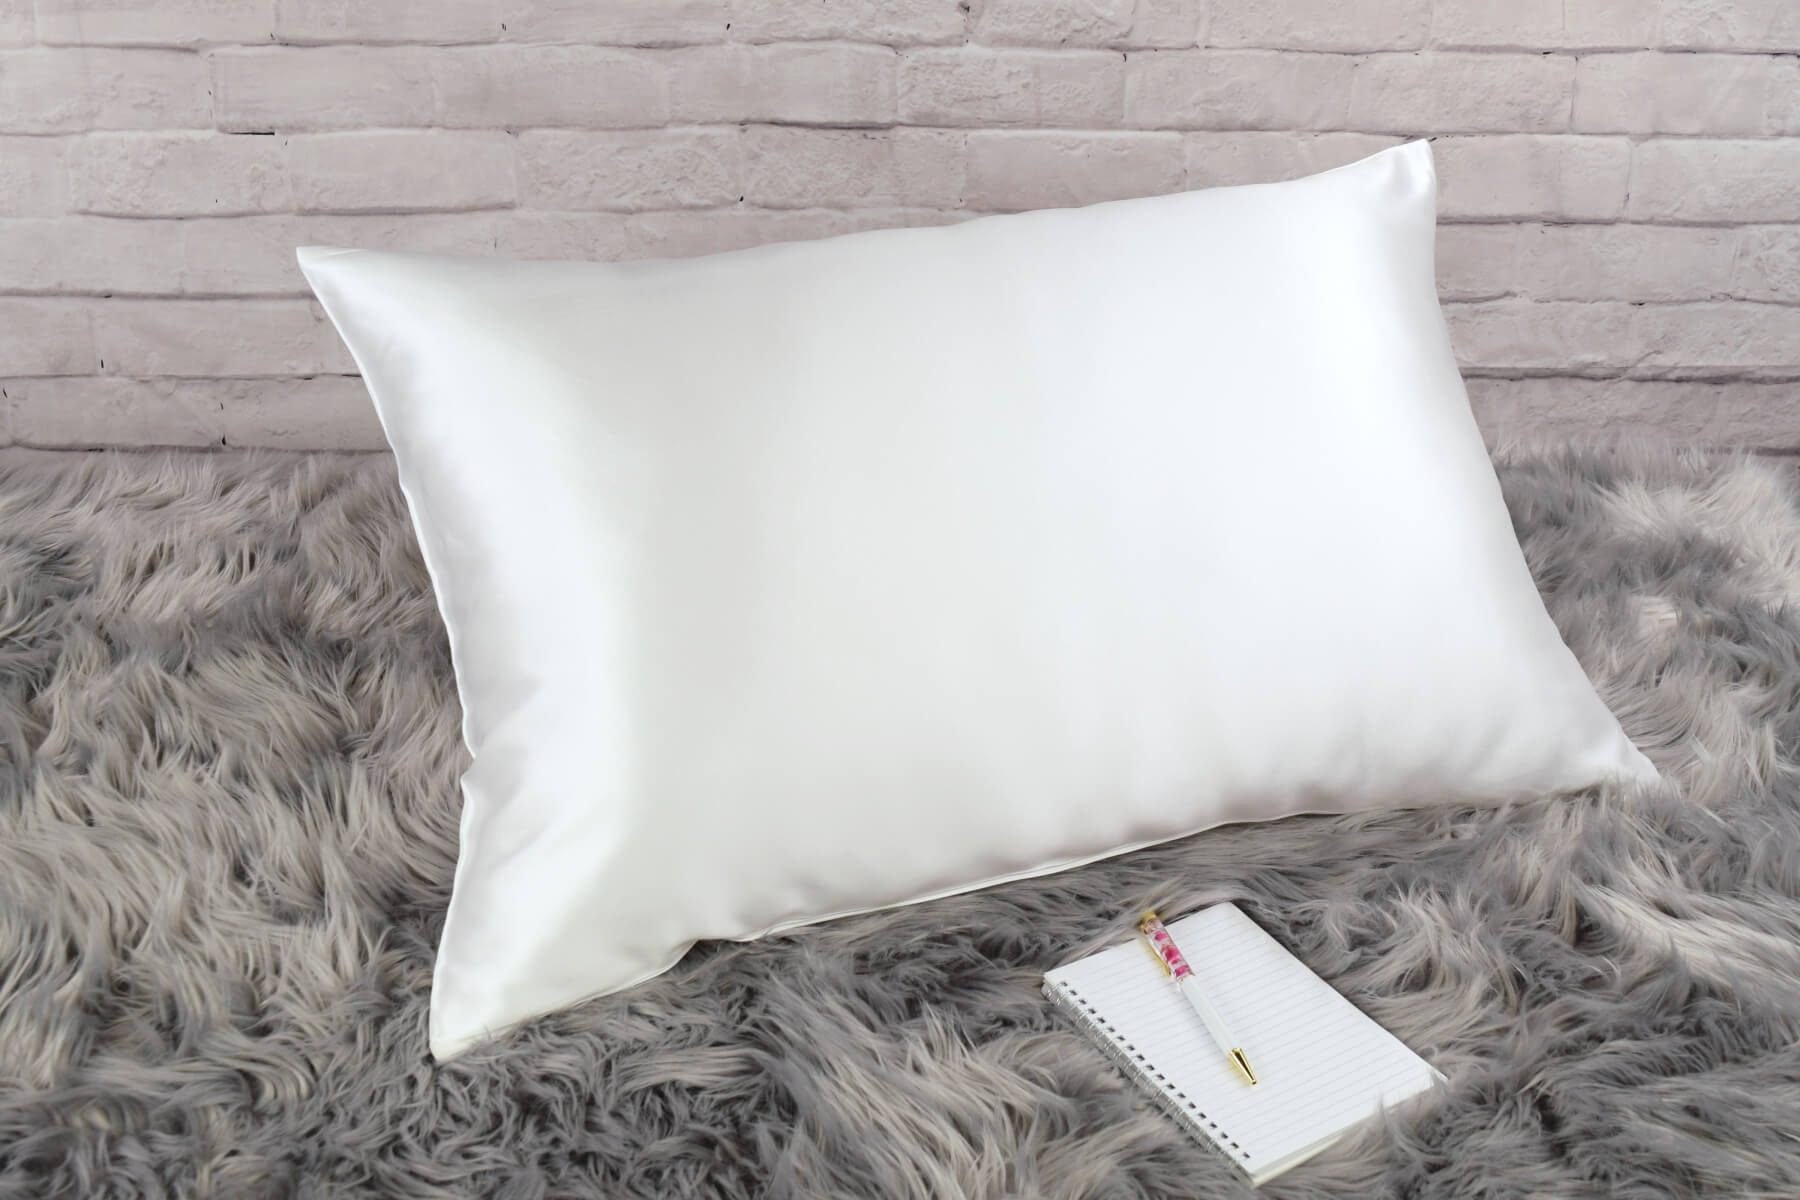 Celestial Silk 25 momme undyed ivory silk pillowcase on faux fur rug with notebook and pretty pen